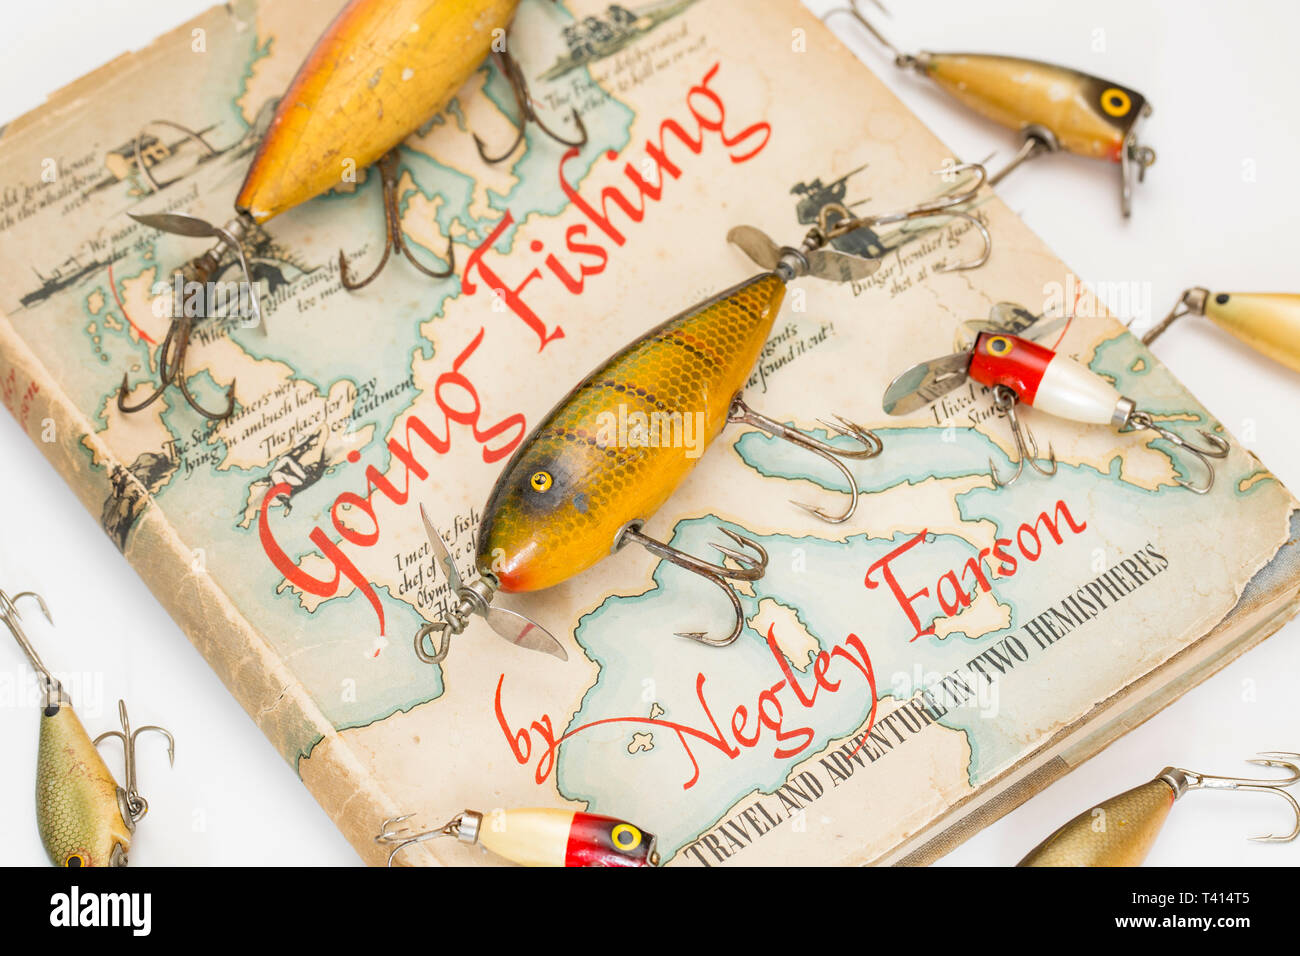 https://c8.alamy.com/comp/T414T5/a-reprinted-1943-edition-of-negley-farsons-famous-book-going-fishing-illustrated-by-cf-tunnicliffe-the-first-edition-being-published-in-1942-it-h-T414T5.jpg